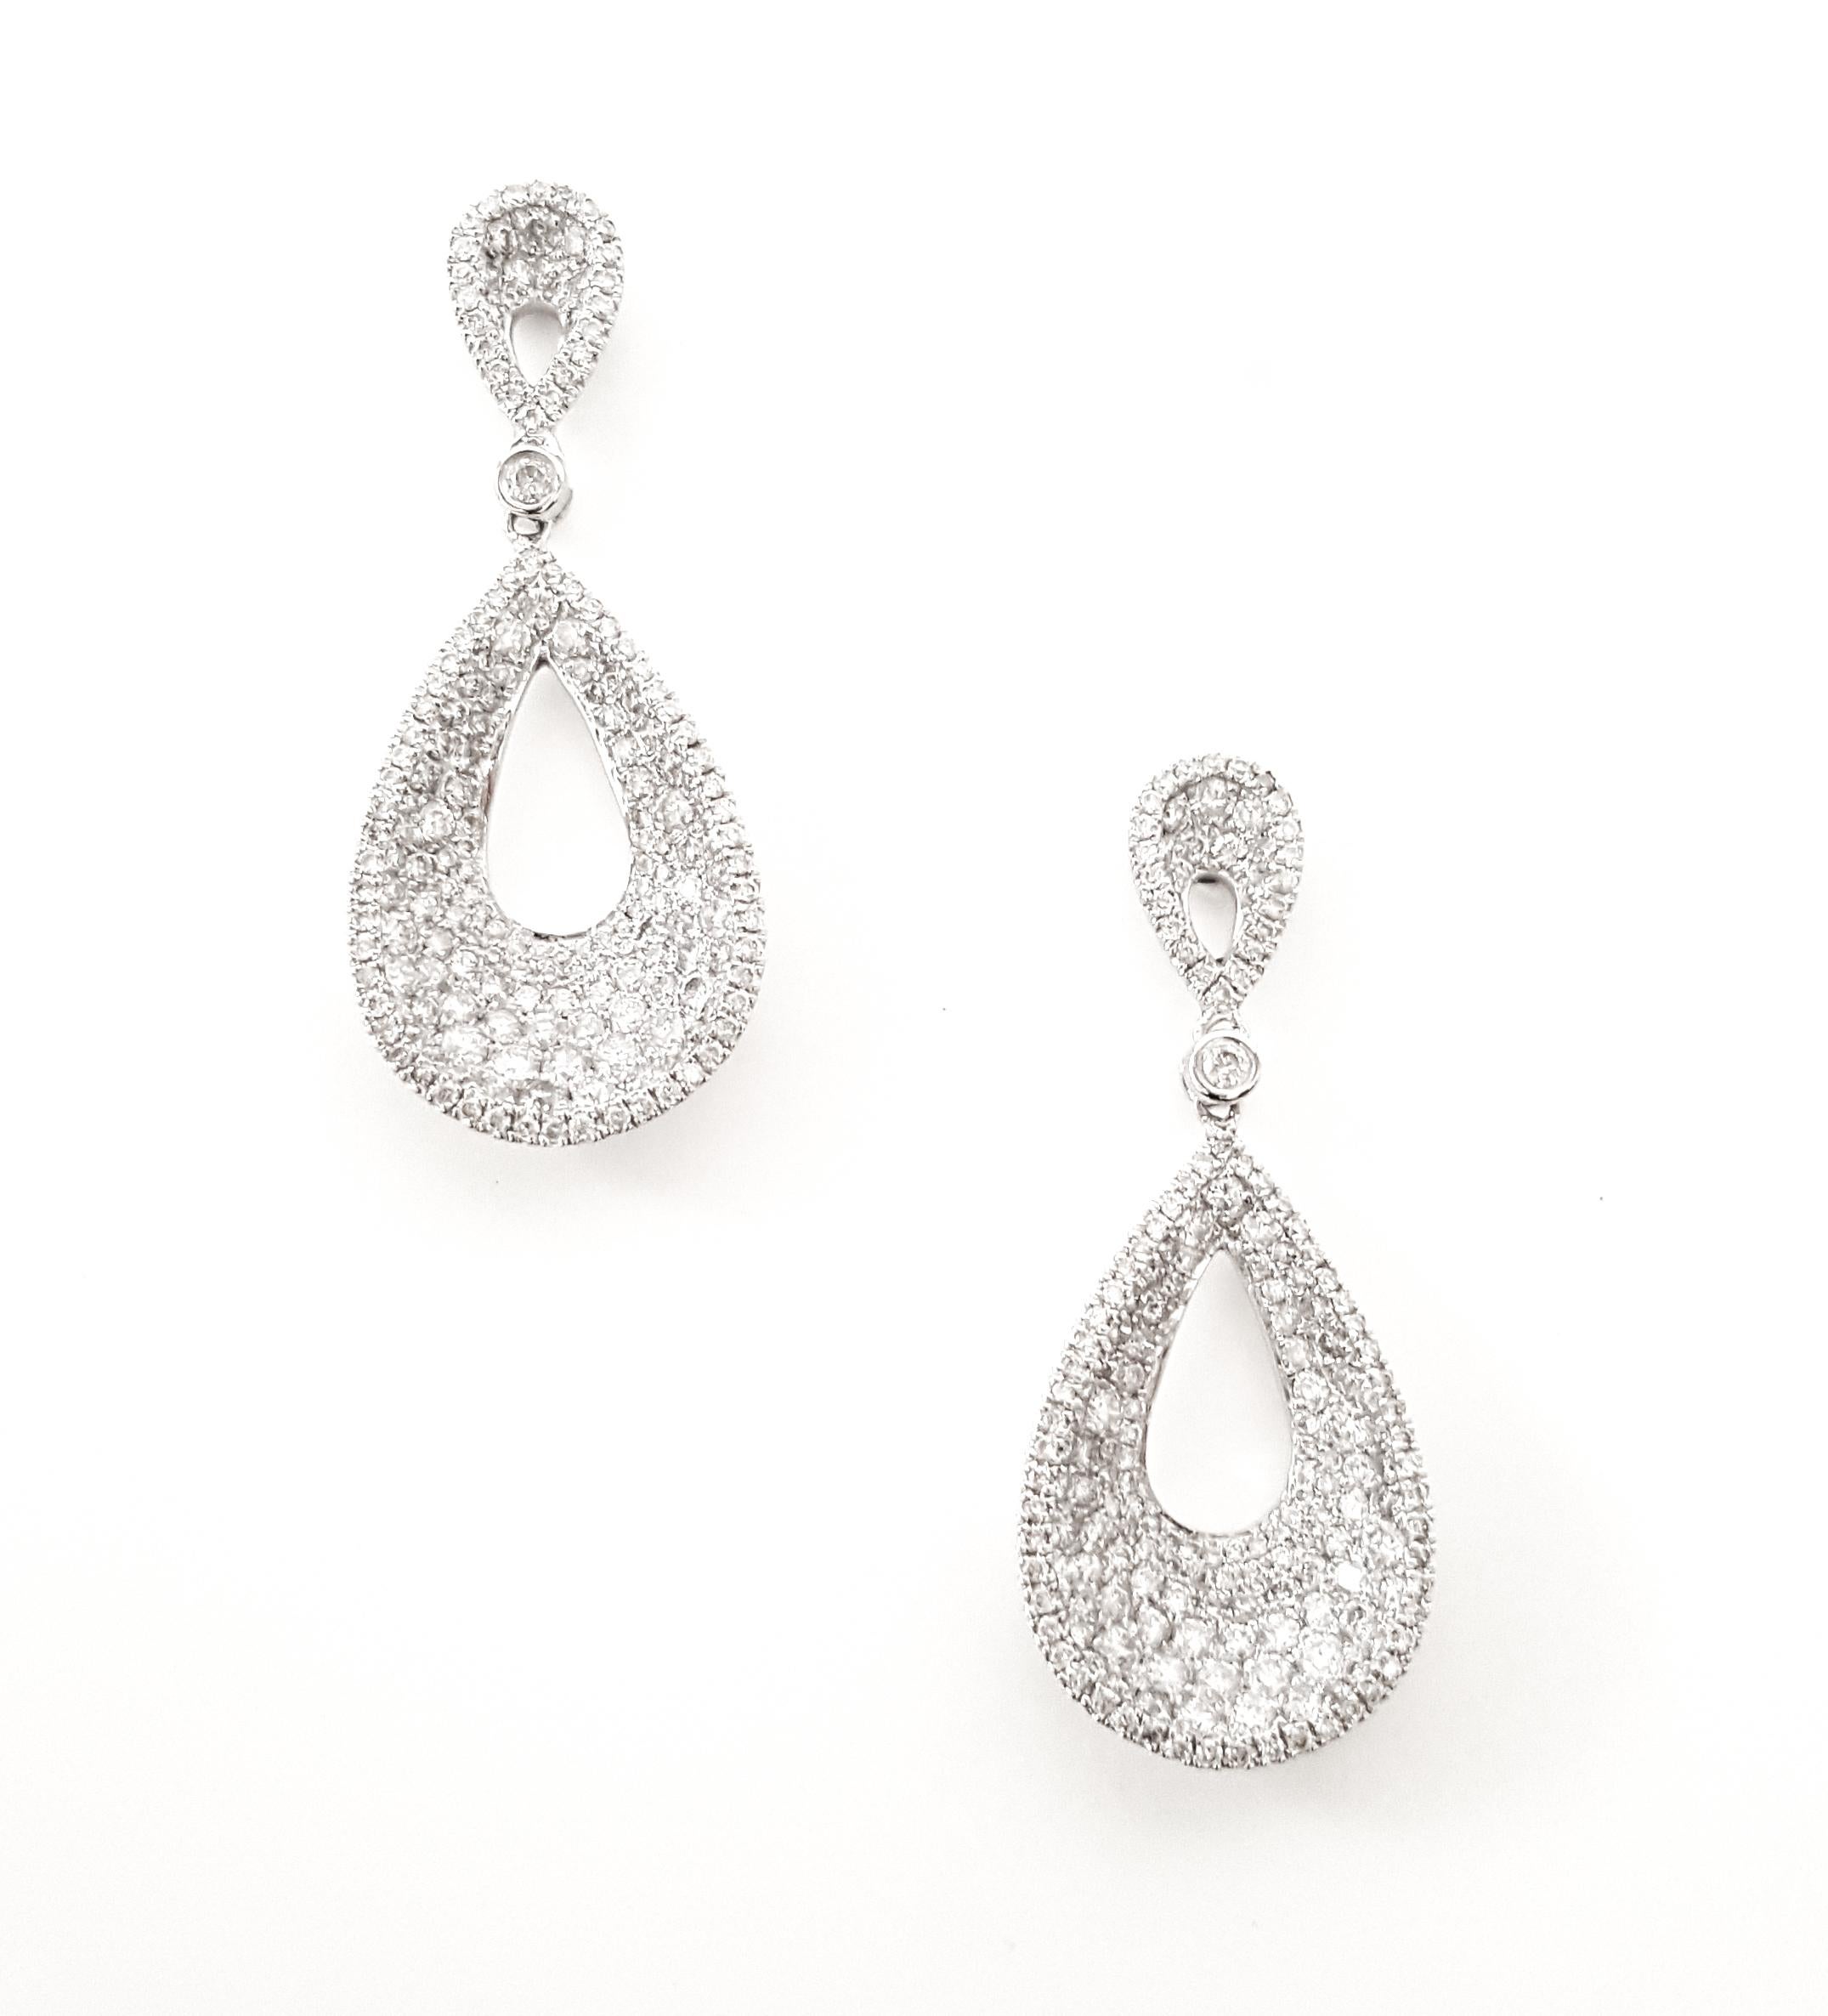 Contemporary Dazzling 14KW Diamond Dangling Earrings - 1.82ct Round, Concave Design For Sale